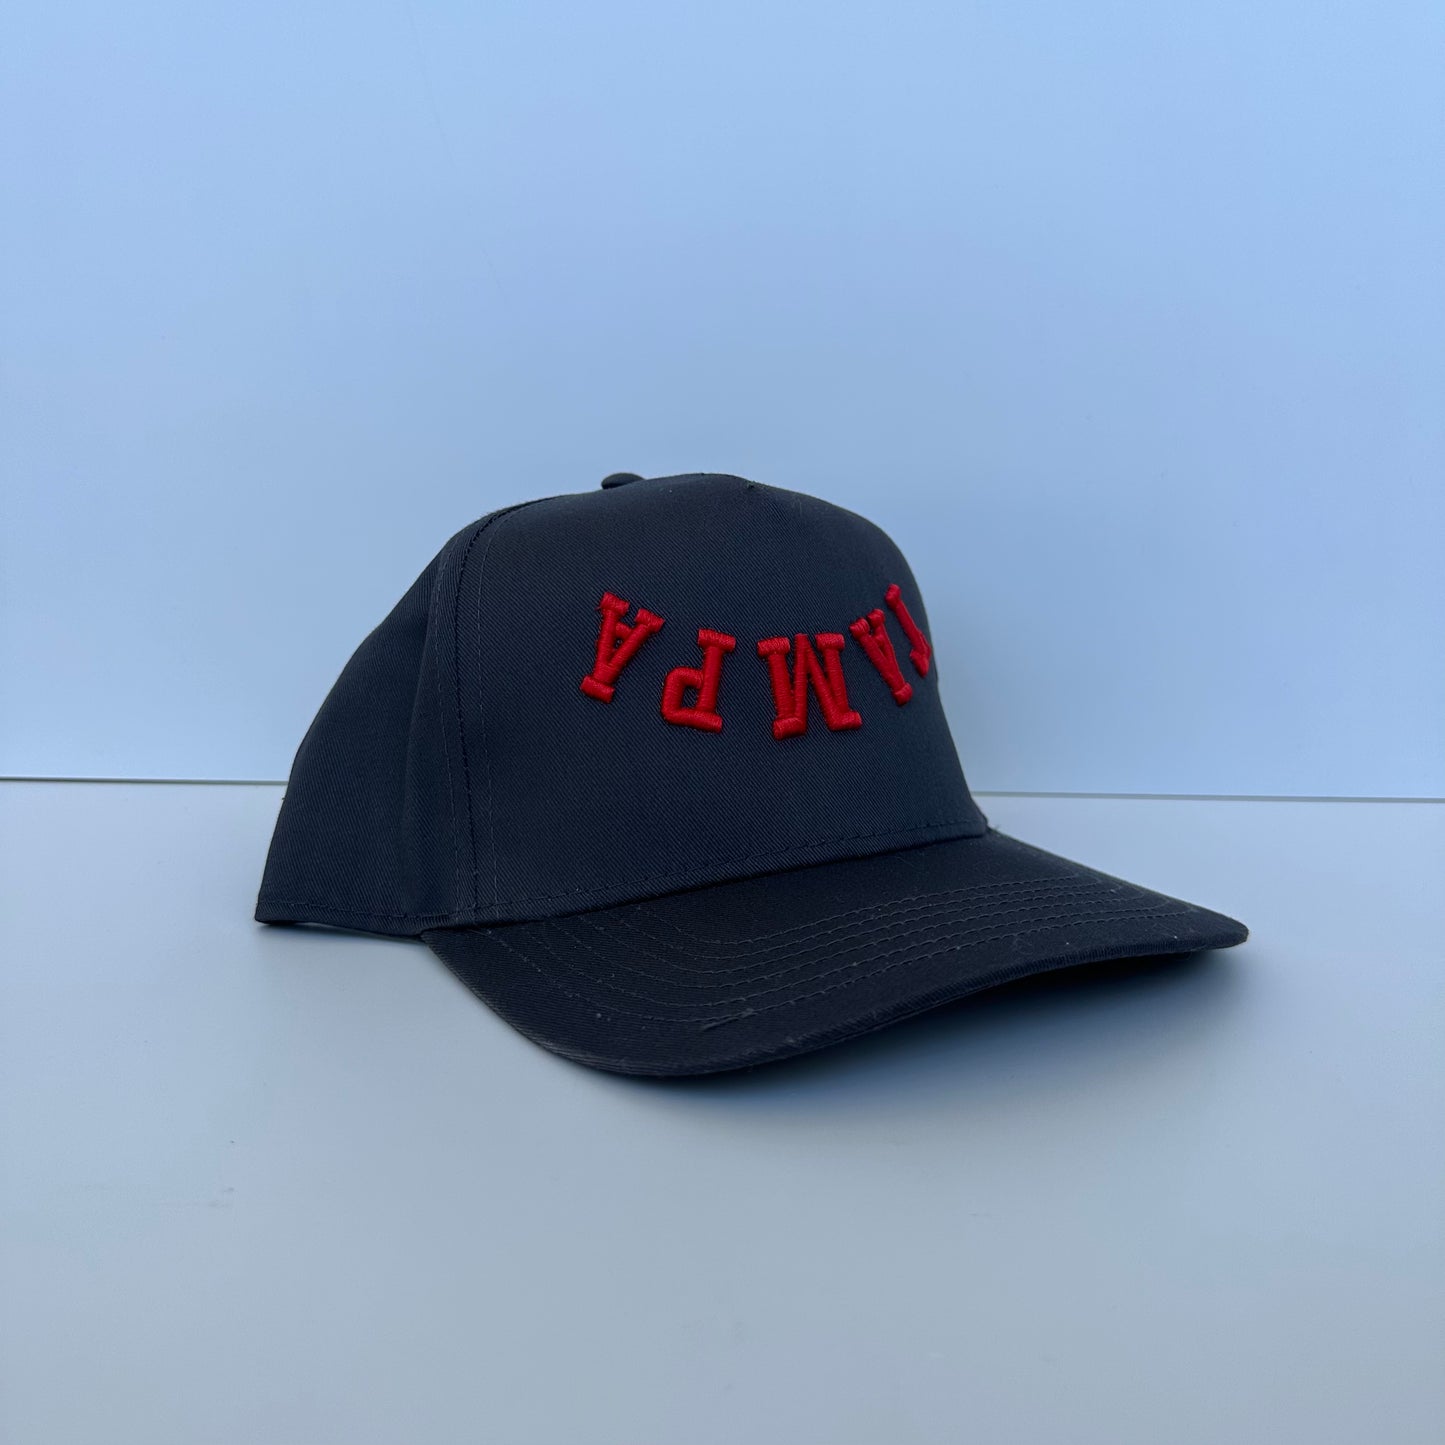 The Tampa Hat - Grey/Red